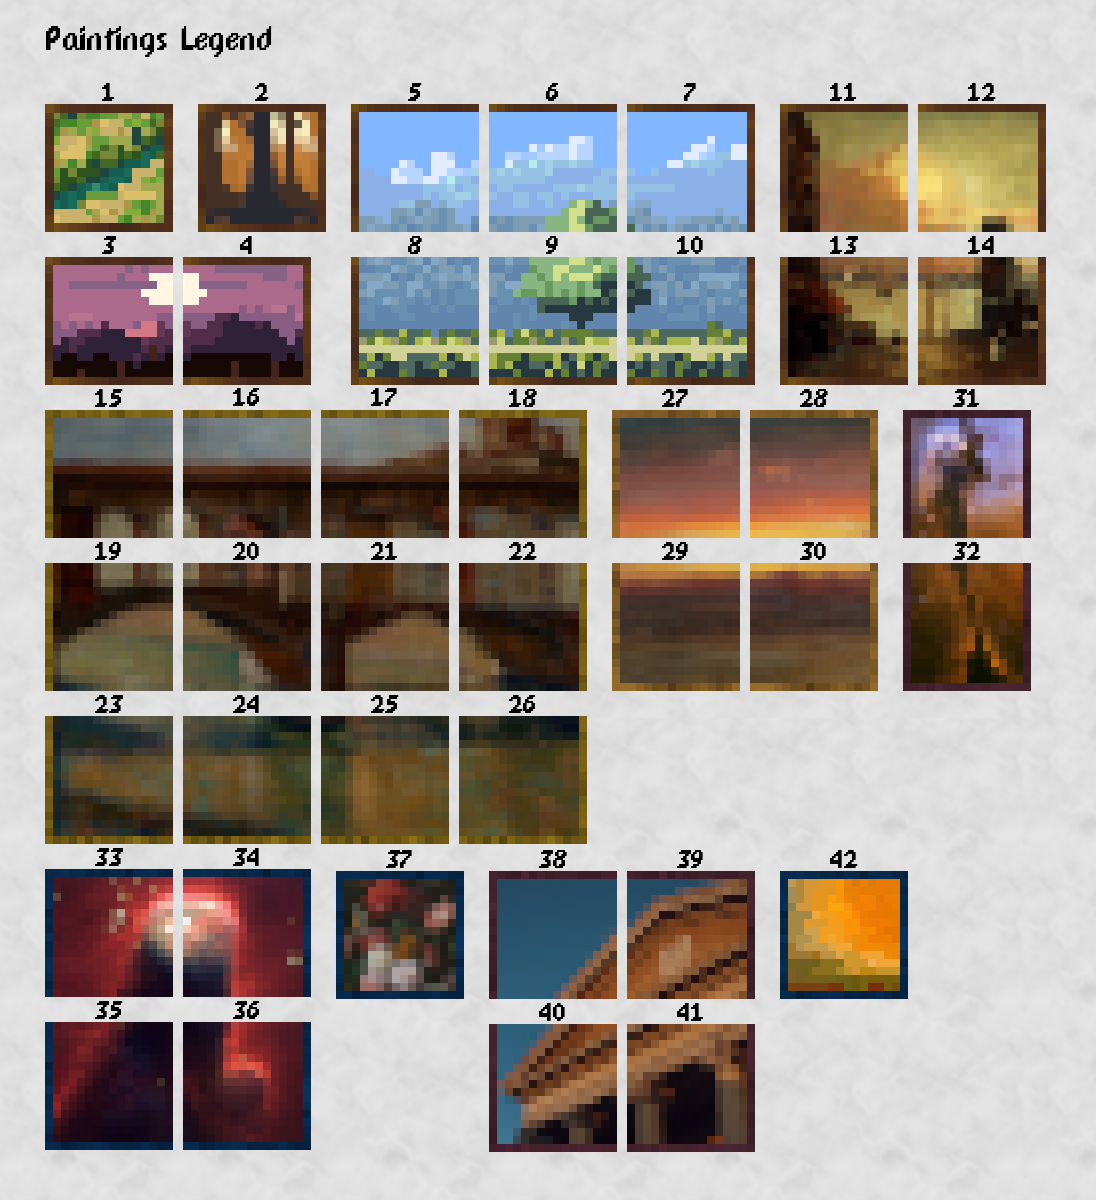 All the paintings that are available by default in version 1.4.0